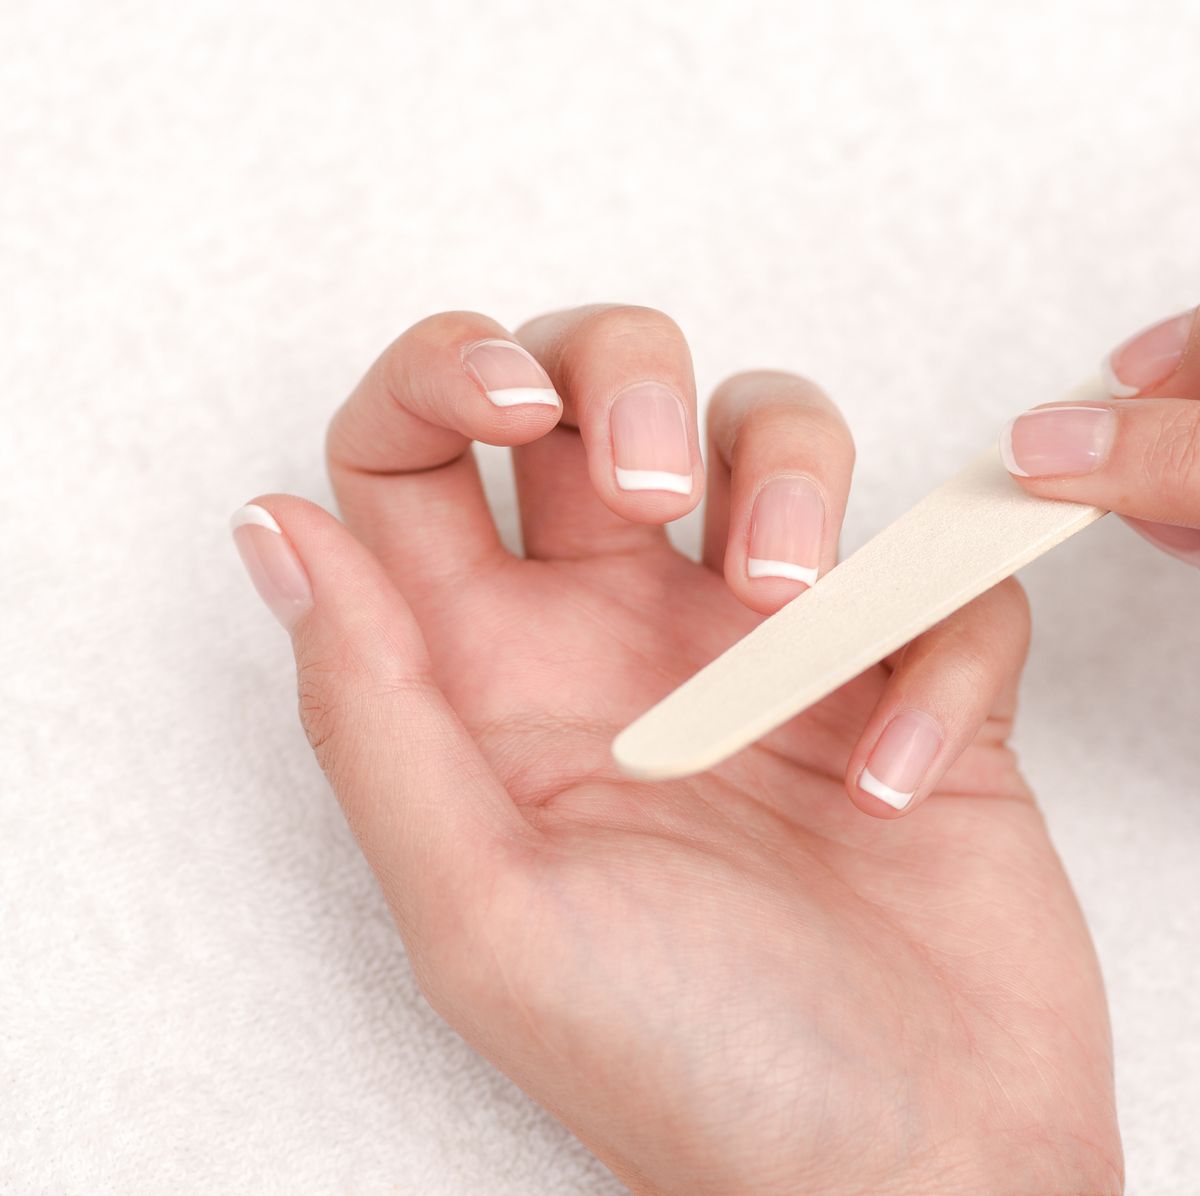 grow nails in just 3 days, faster nail growth tips